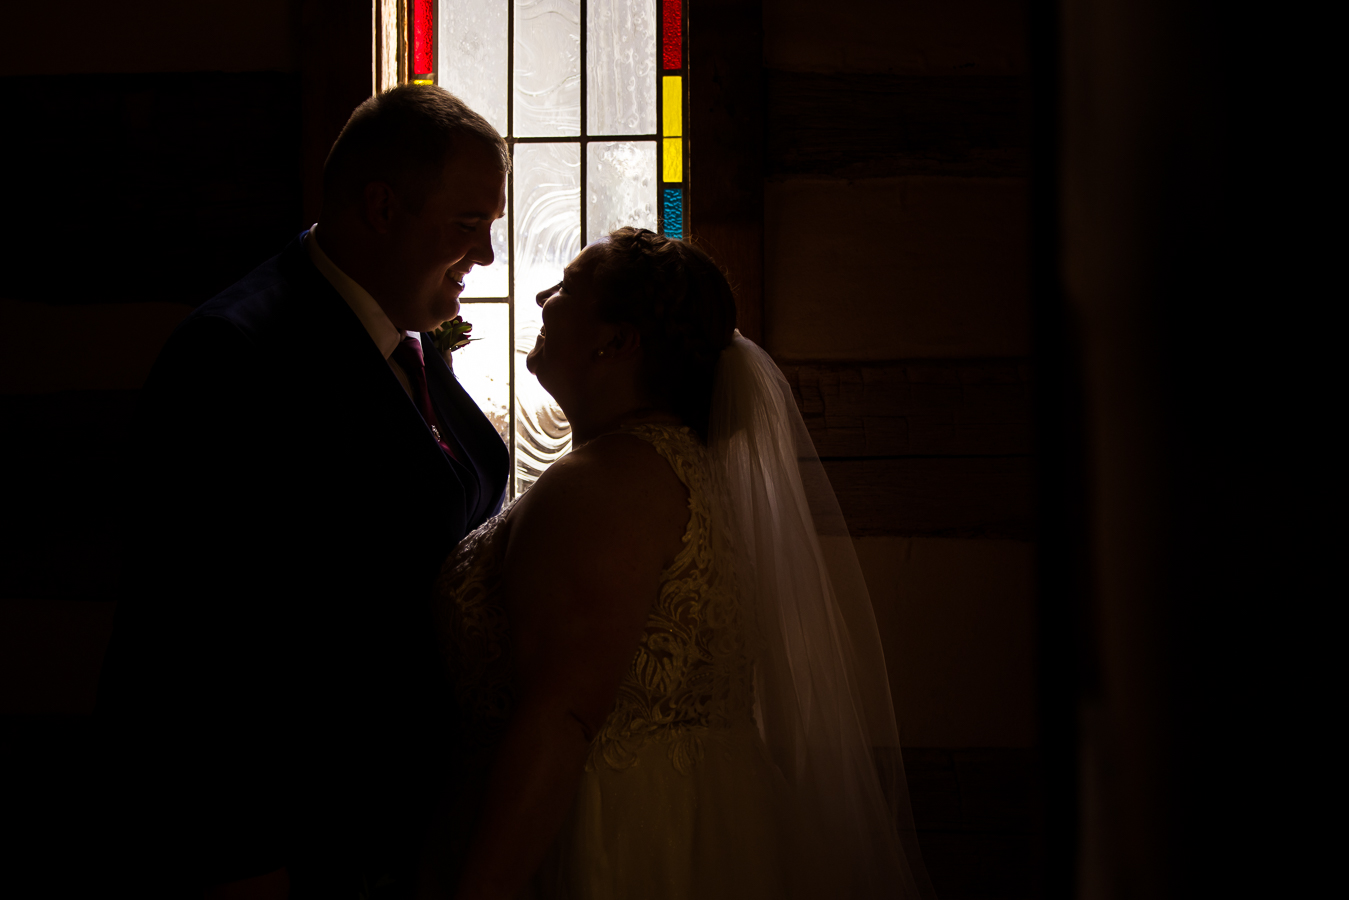 unique, creative silhouette image of the bride and groom as they stand beside a colorful stained glass window 